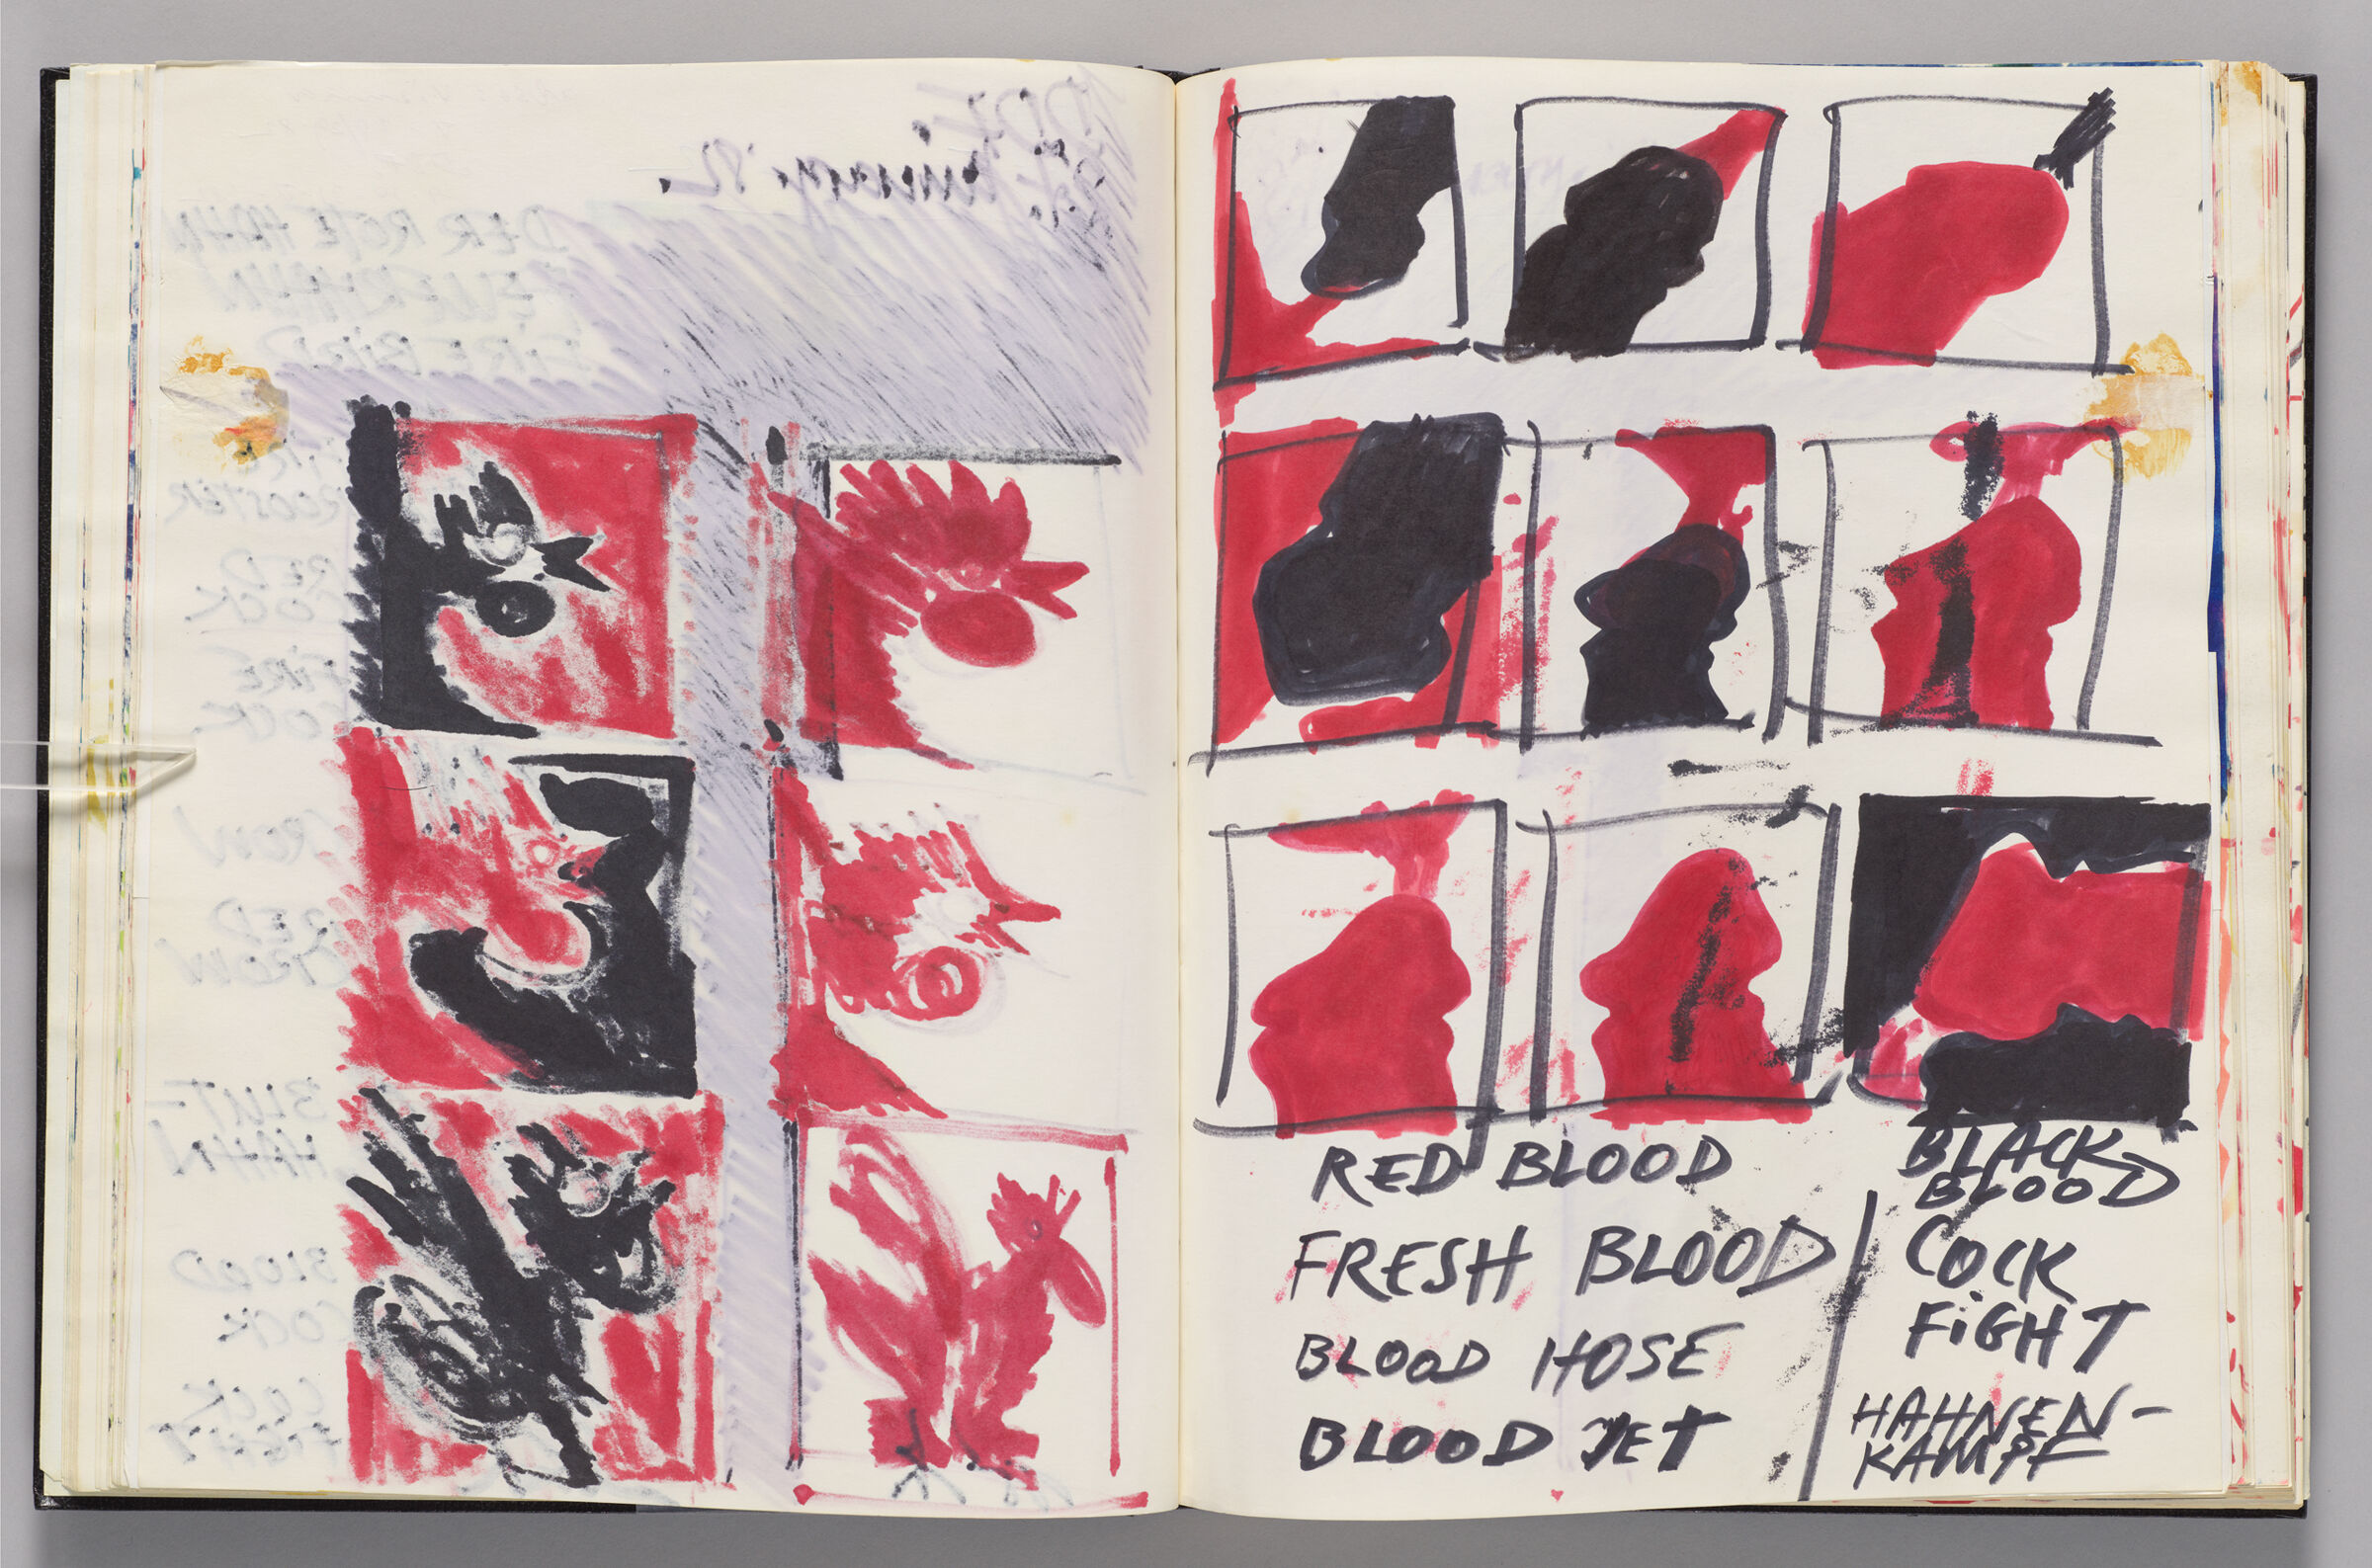 Untitled (Bleed-Through Of Previous Page, Left Page); Untitled (Red Blood/Fresh Blood, Right Page)